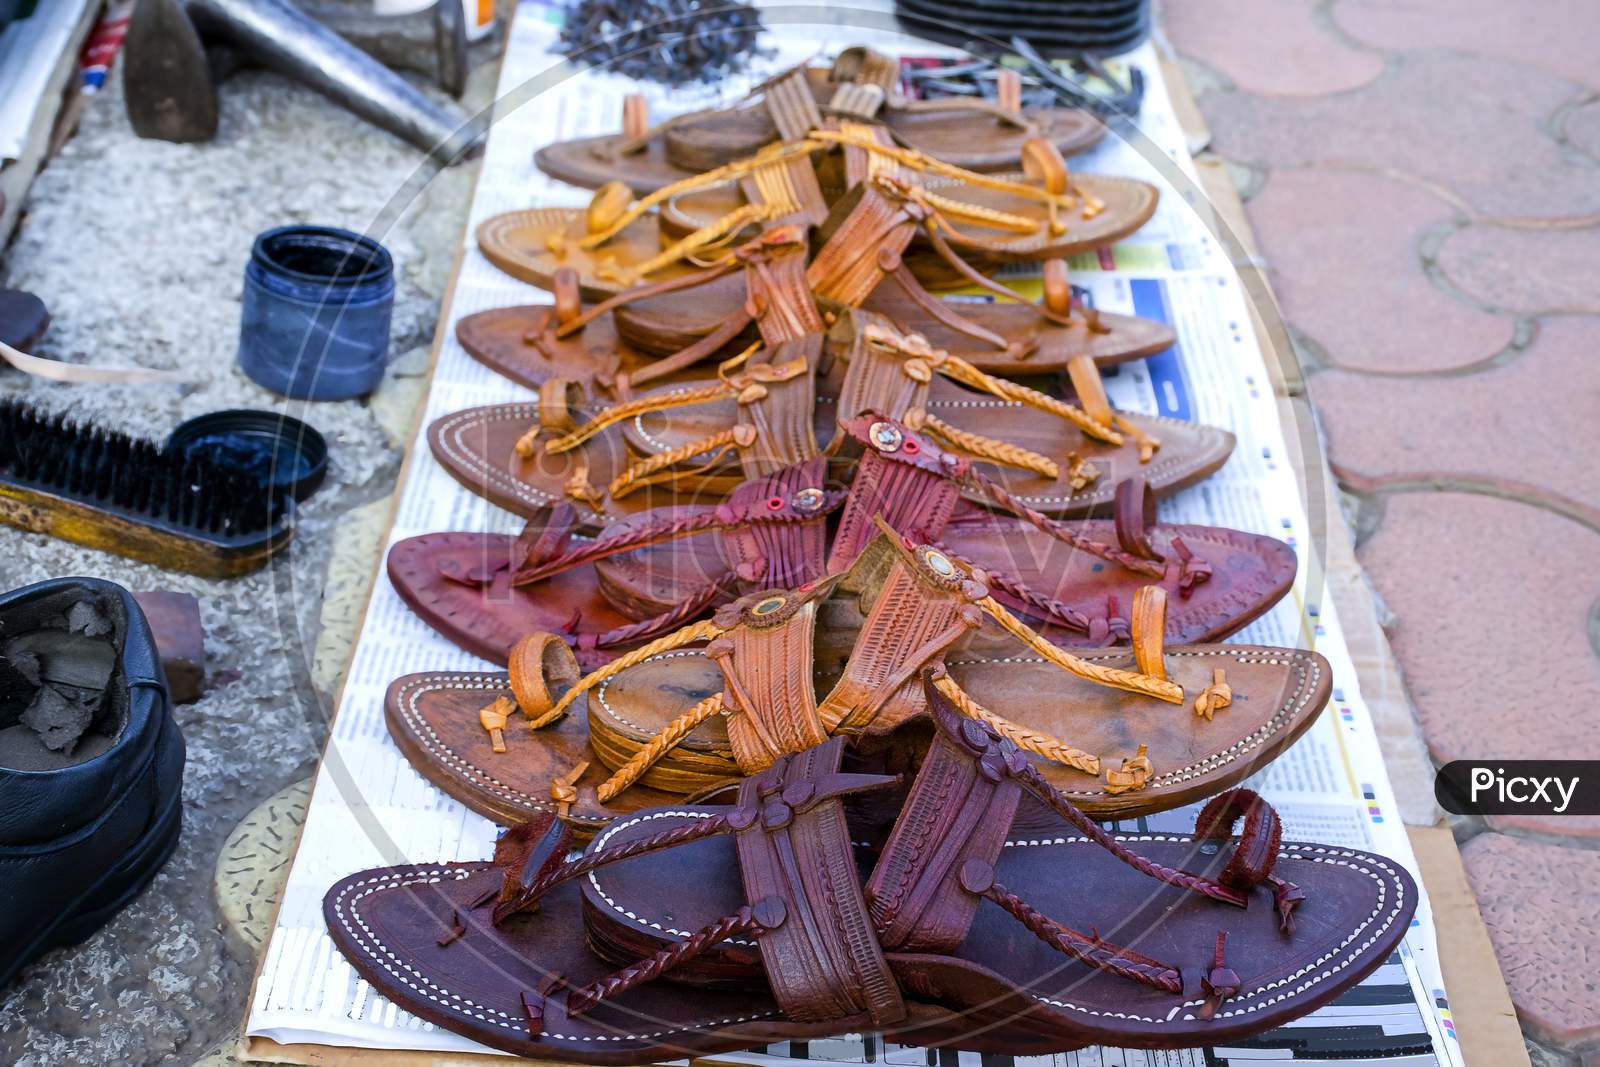 Stock Photo Of Popular And Traditional Kolhapuri Chappal Kept On Roadside For Sale At Indian Market.It Is Handmade Leather Chappal With Unique Design And Color.